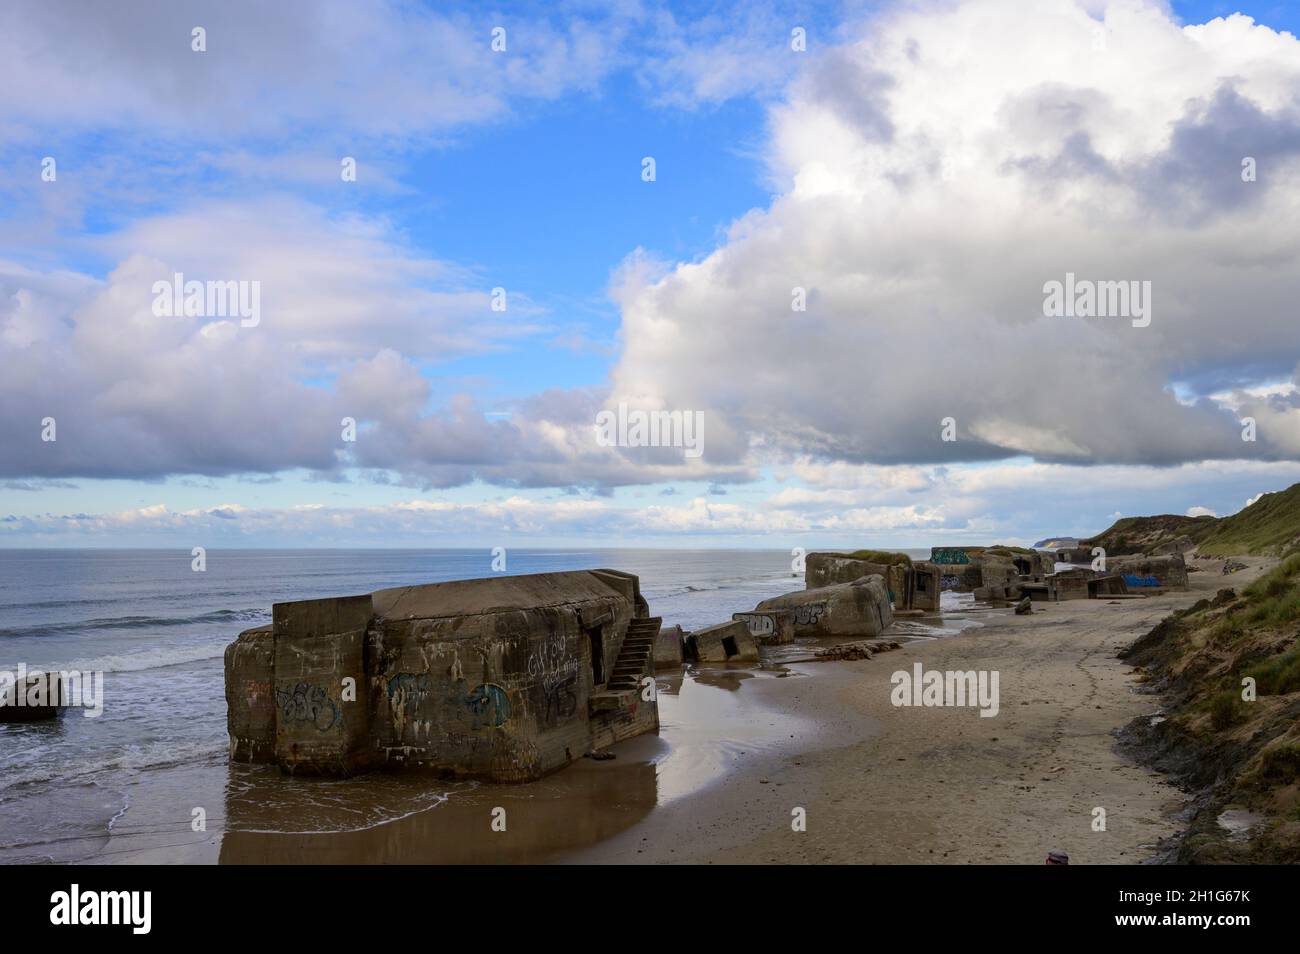 Furreby coastal battery, WWII bunkers on the beach at Løkken at Furreby, Denmark Stock Photo